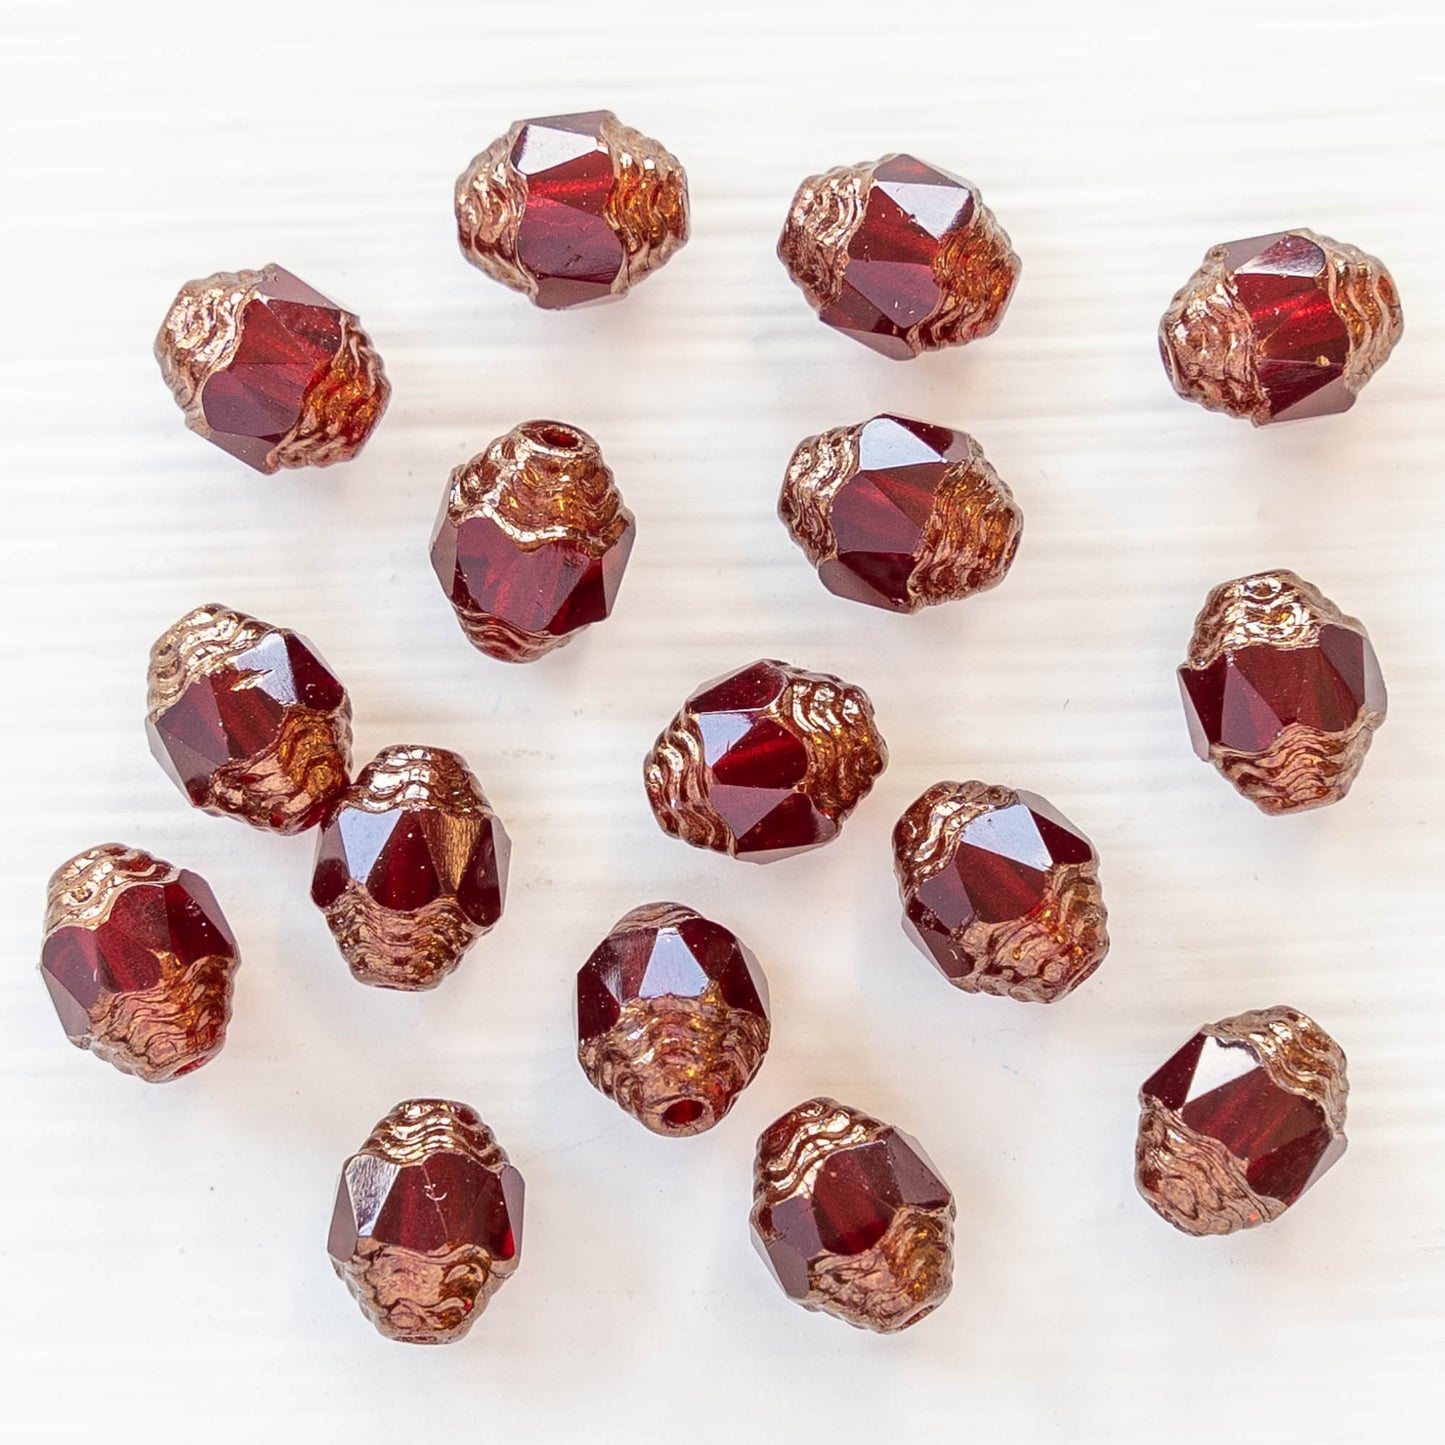 8x6mm Czech Cathedral Beads - Red with Gold Finish - 16 Beads